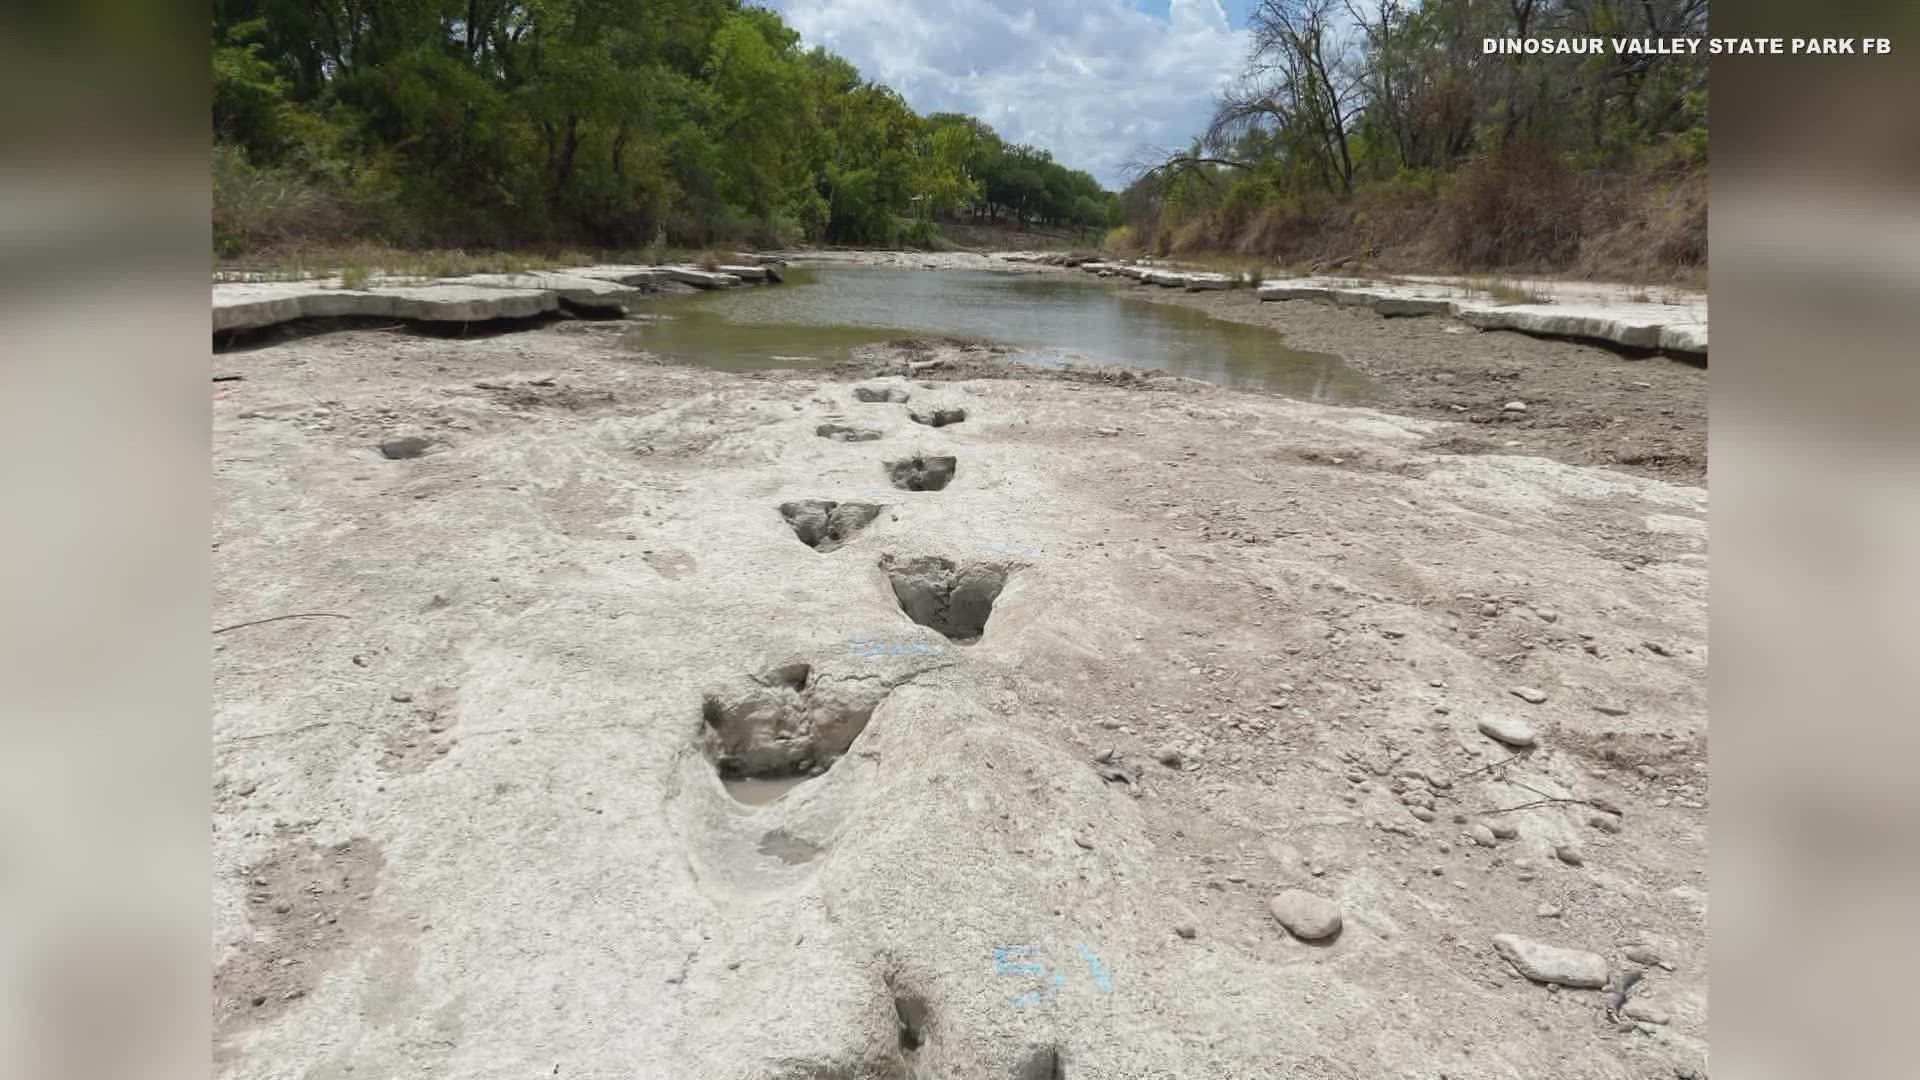 Due to the recent drought and rain patterns in Central Texas, various dinosaur tracks have been uncovered at the Dinosaur Valley State Park in Glen Rose, Texas.